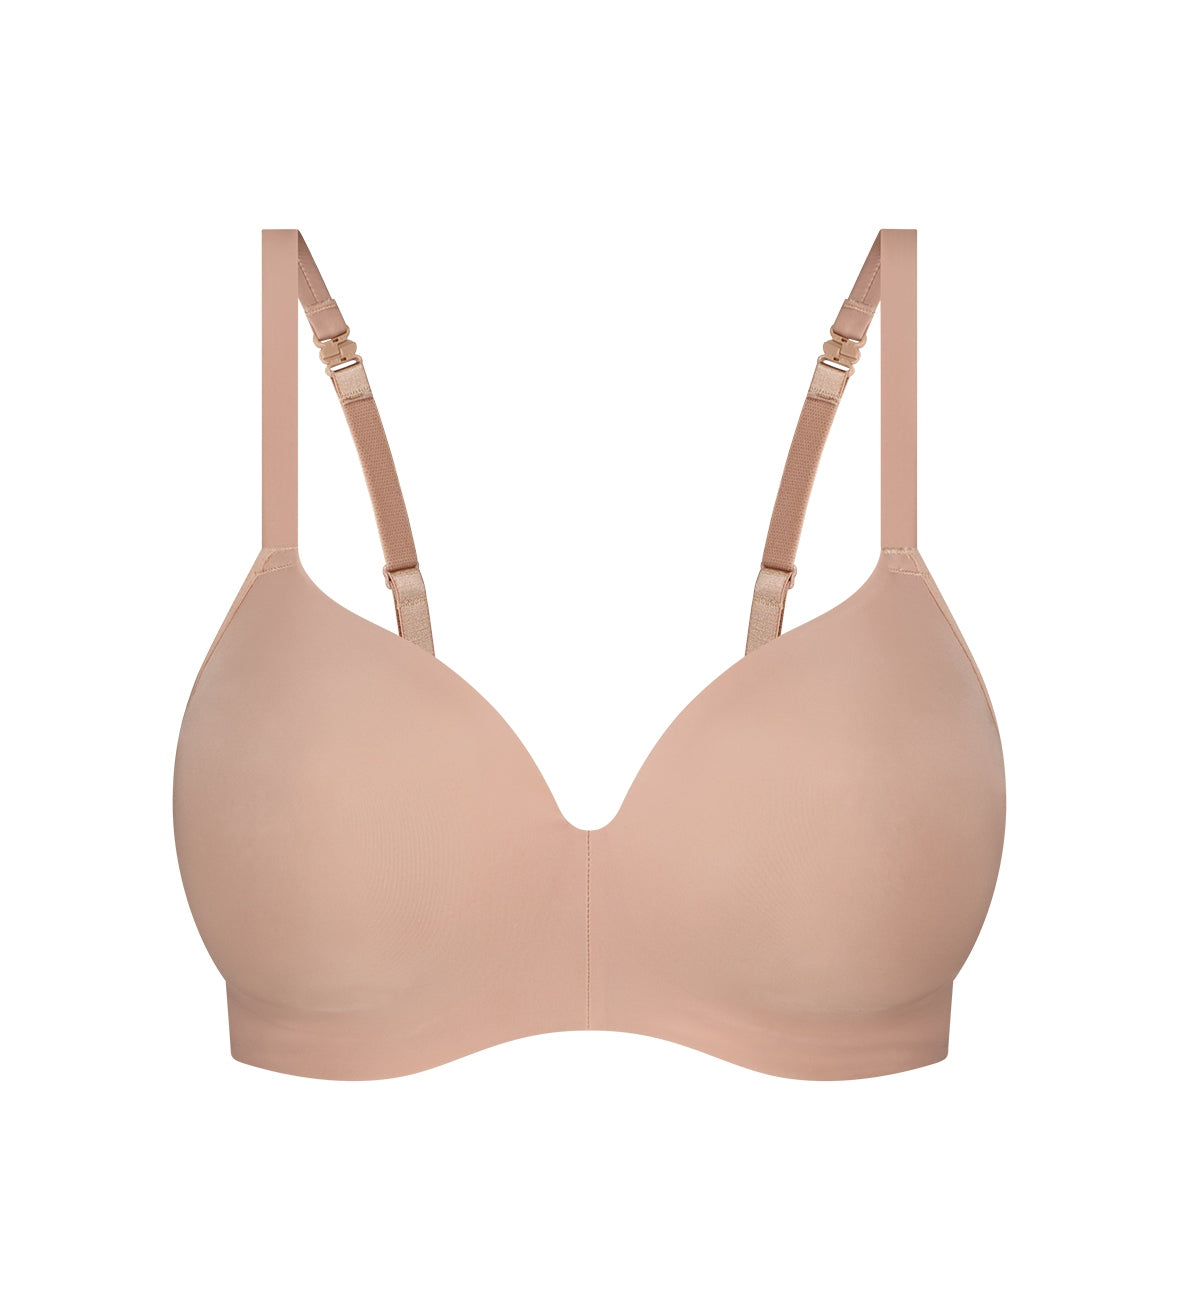 Everyday Moulded Bra In beige, Wired Bras